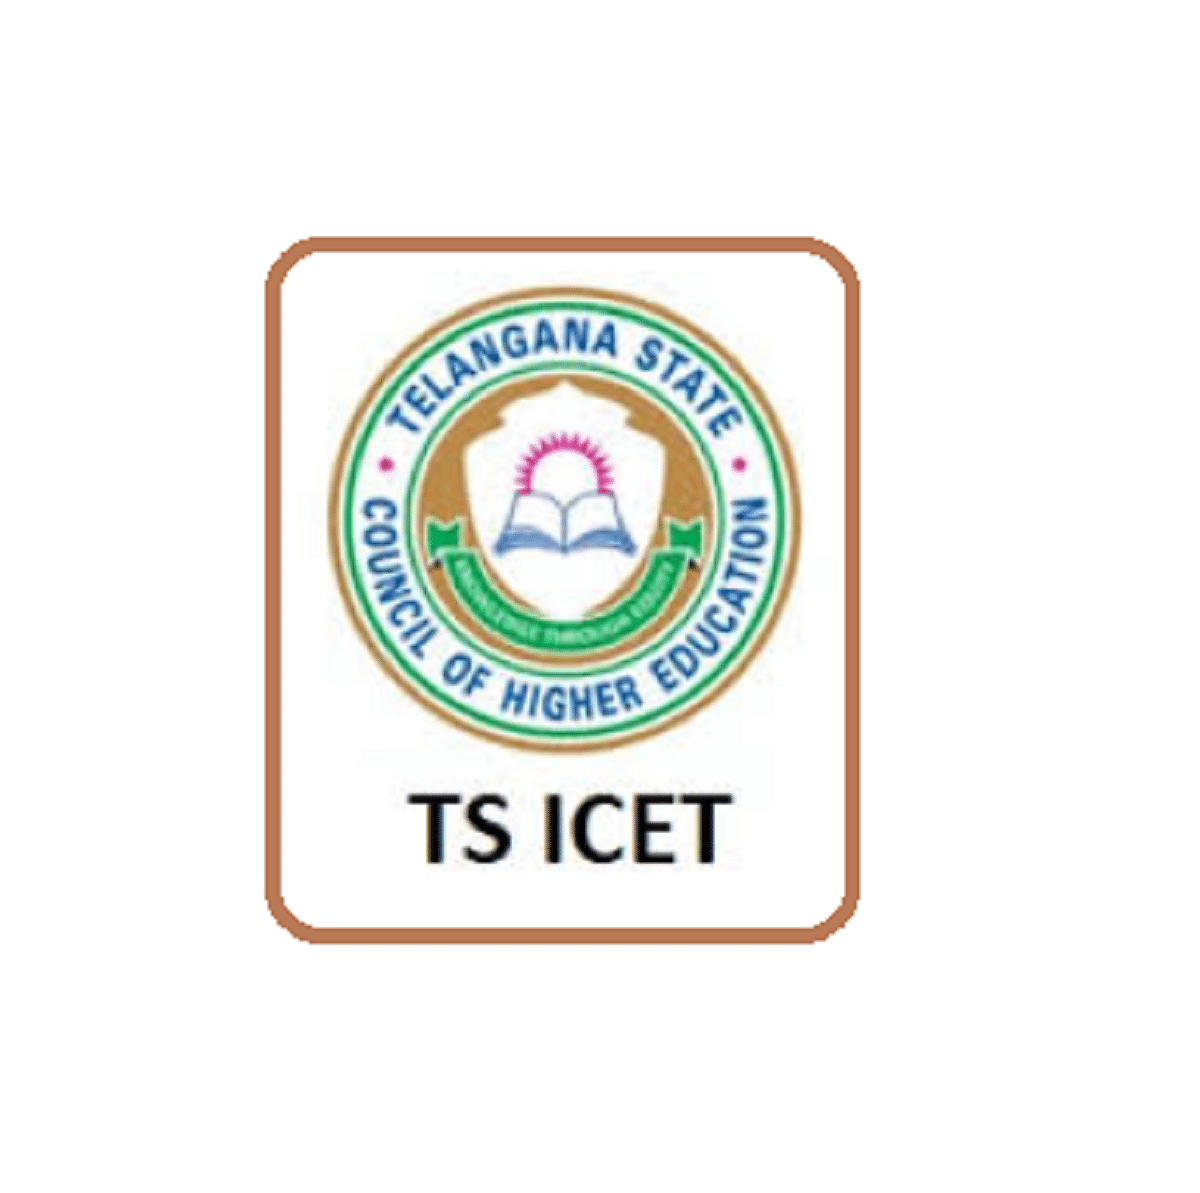 TS ICET 2020 Result along with the Final Answer key Expected Today at 3:30 PM